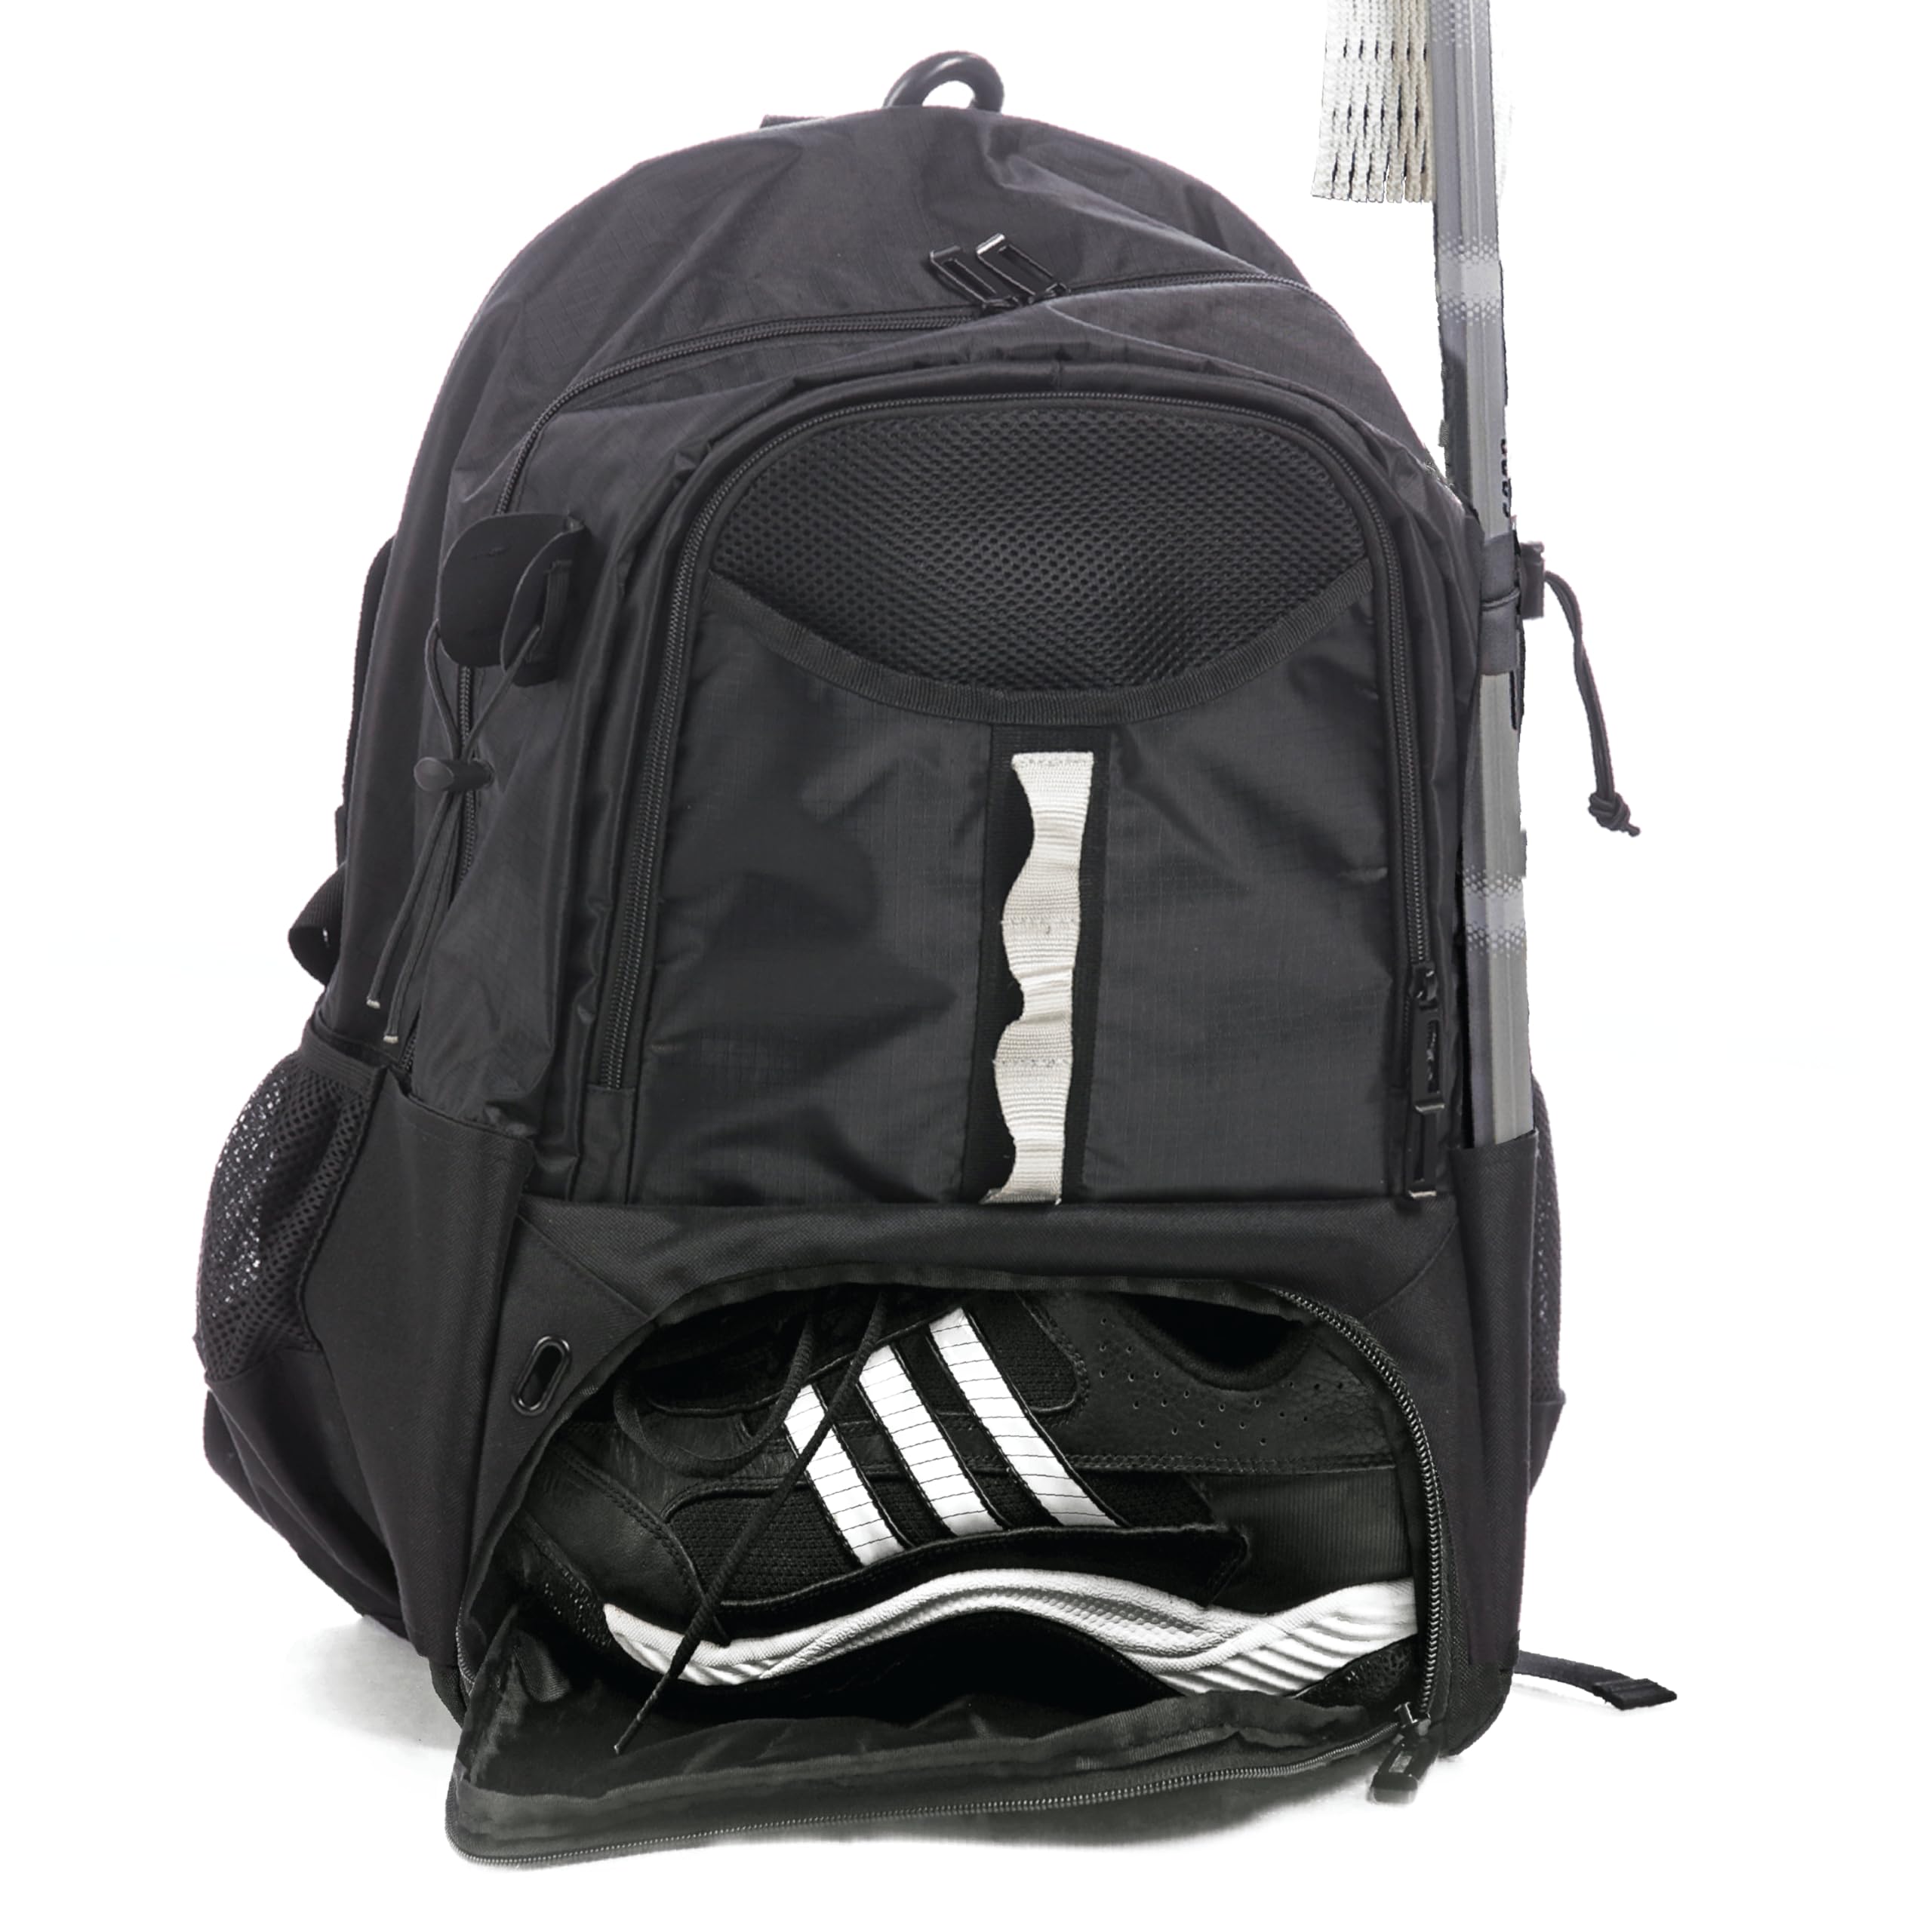 Athletico Turf Lacrosse Bag - Extra Large Lacrosse Backpack - Holds All Lacrosse or Field Hockey Equipment - Two Stick Holders and Separate Cleats Compartment  - Acceptable